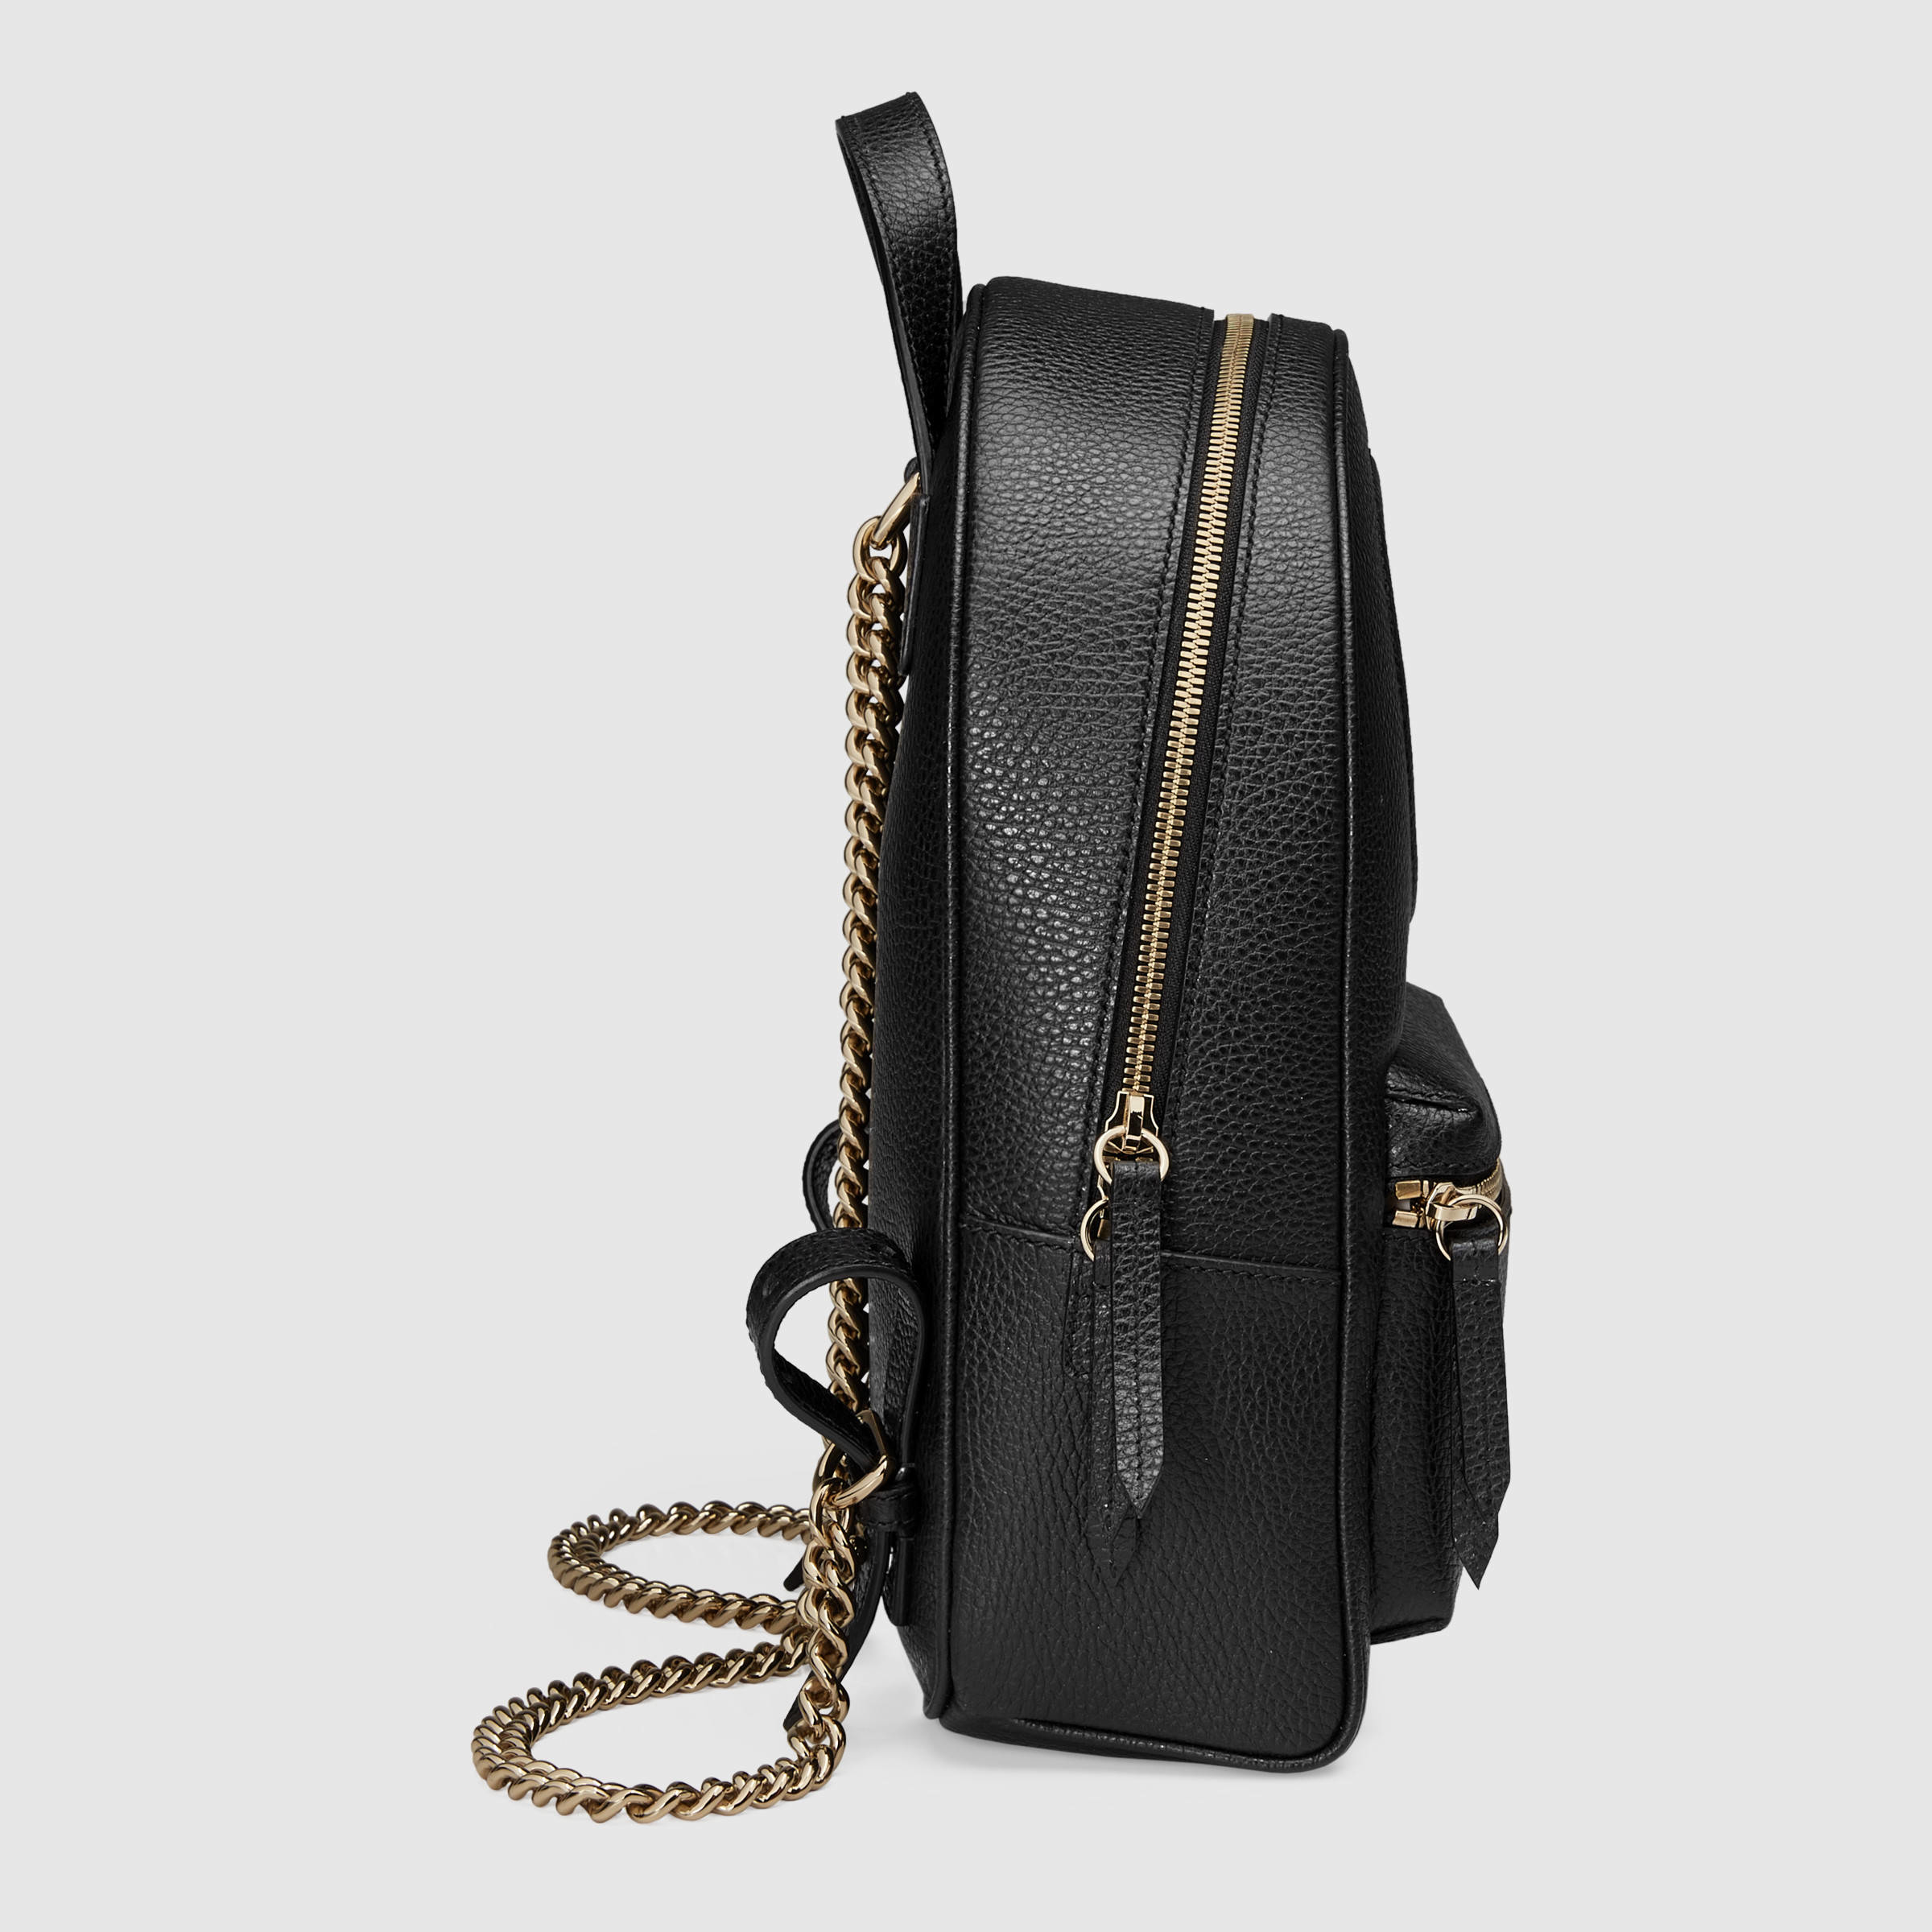 Lyst - Gucci Soho Leather Chain Backpack in Black